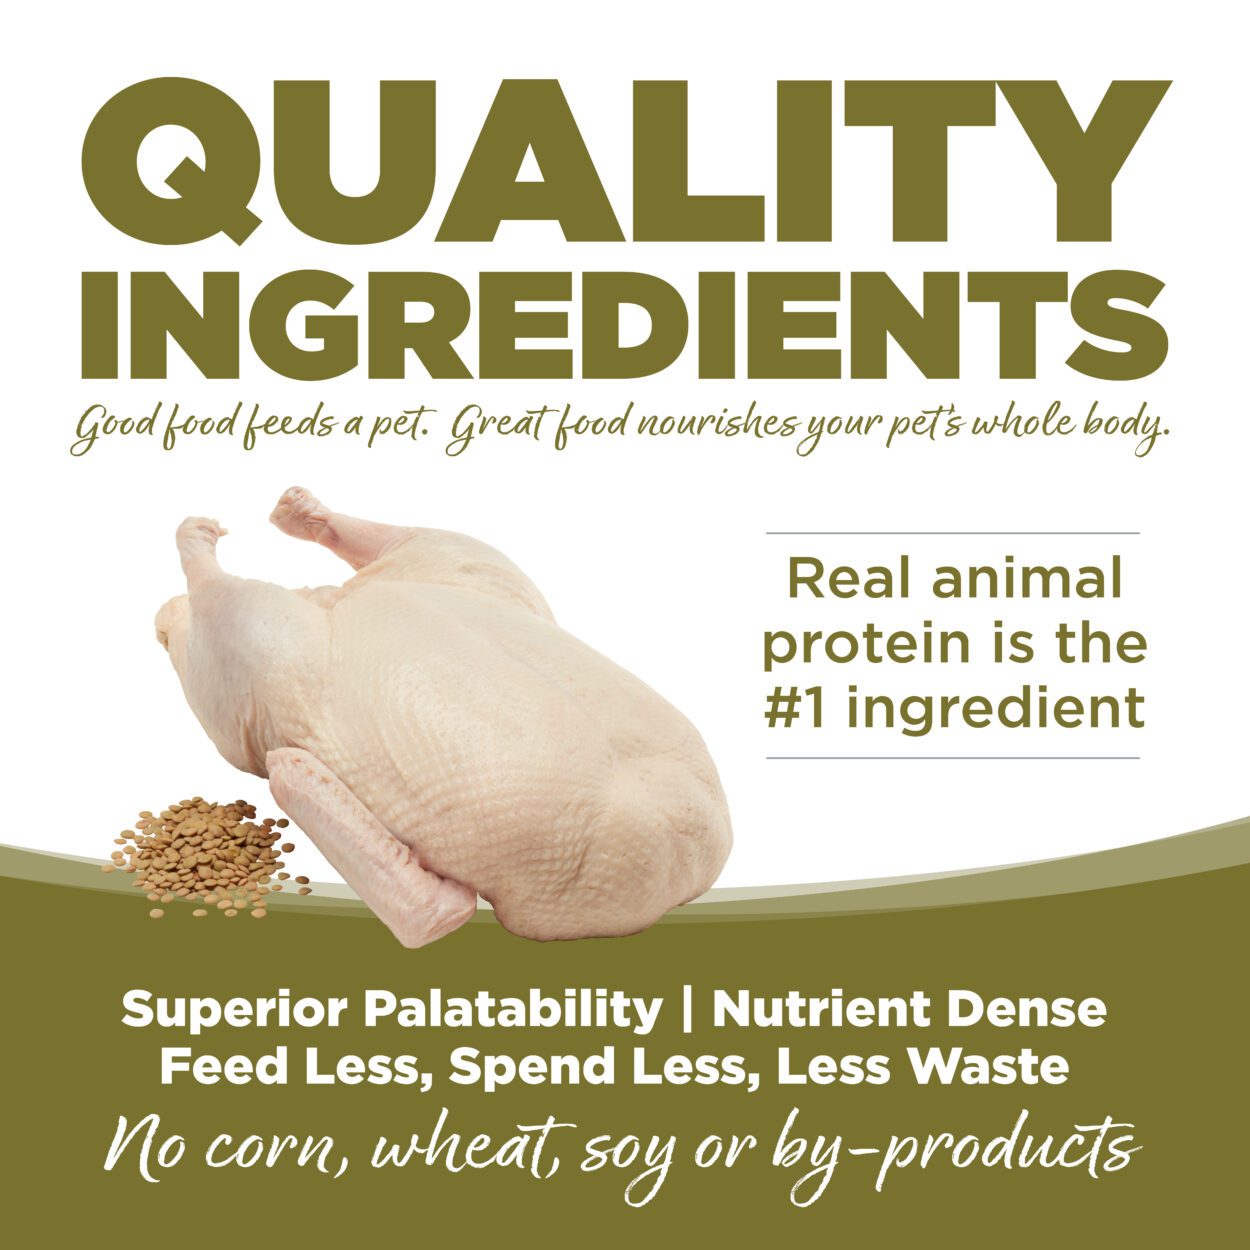 Quality Ingredients (Superior Palatability, Nutrient Dense, Feed Less, Spend Less, Waste Less)